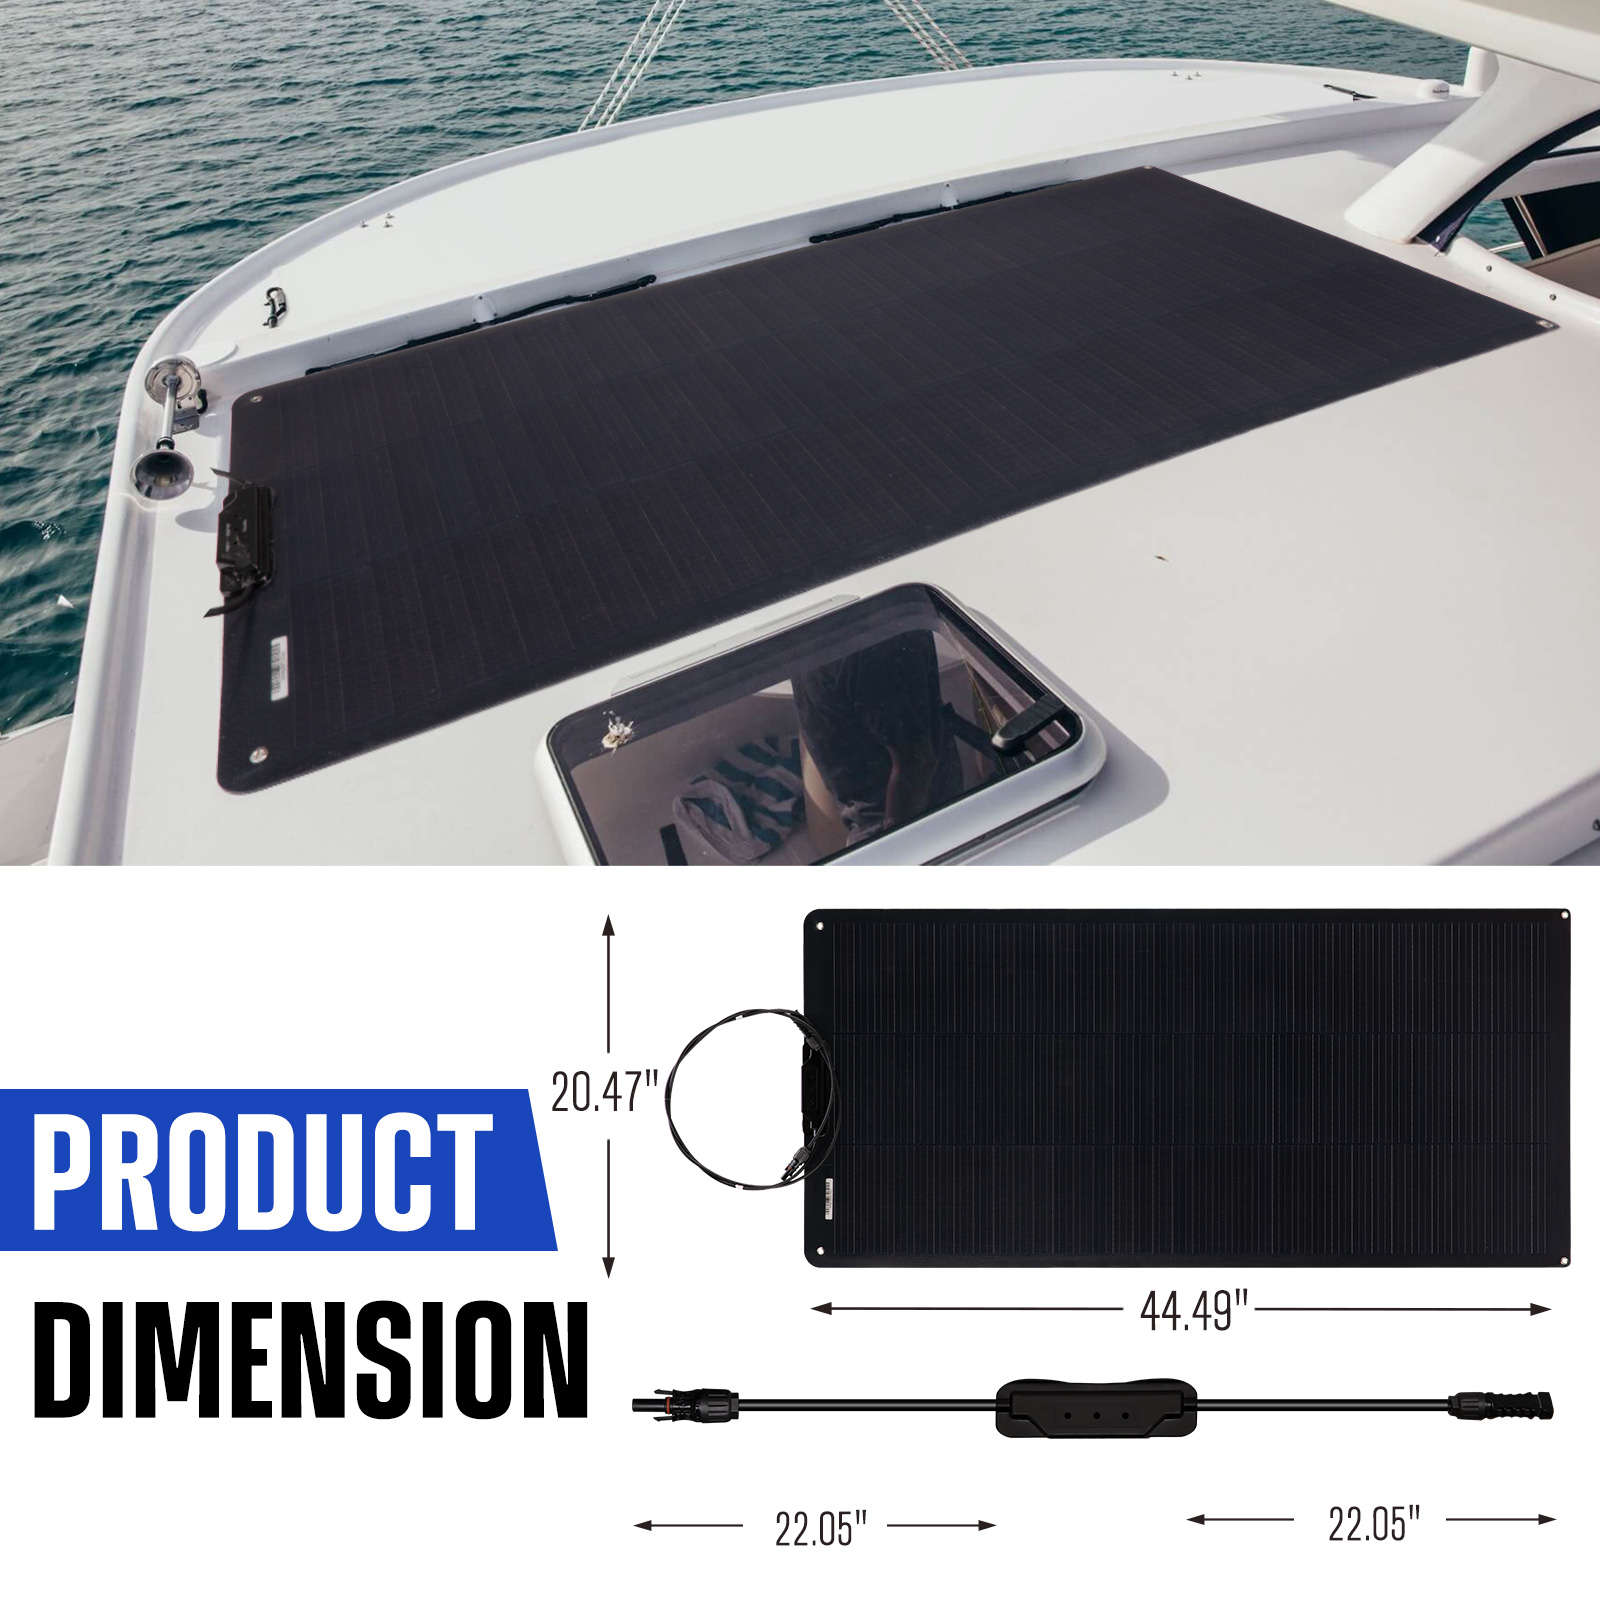 [US Direct] ATEM POWER 100W 12V Monocrystalline Solar Panel Flexible 245 Degree Bendable For RV Tent Roof Boat Cabin Marine Camping 44.49 x 20.47 x 1.26 inches